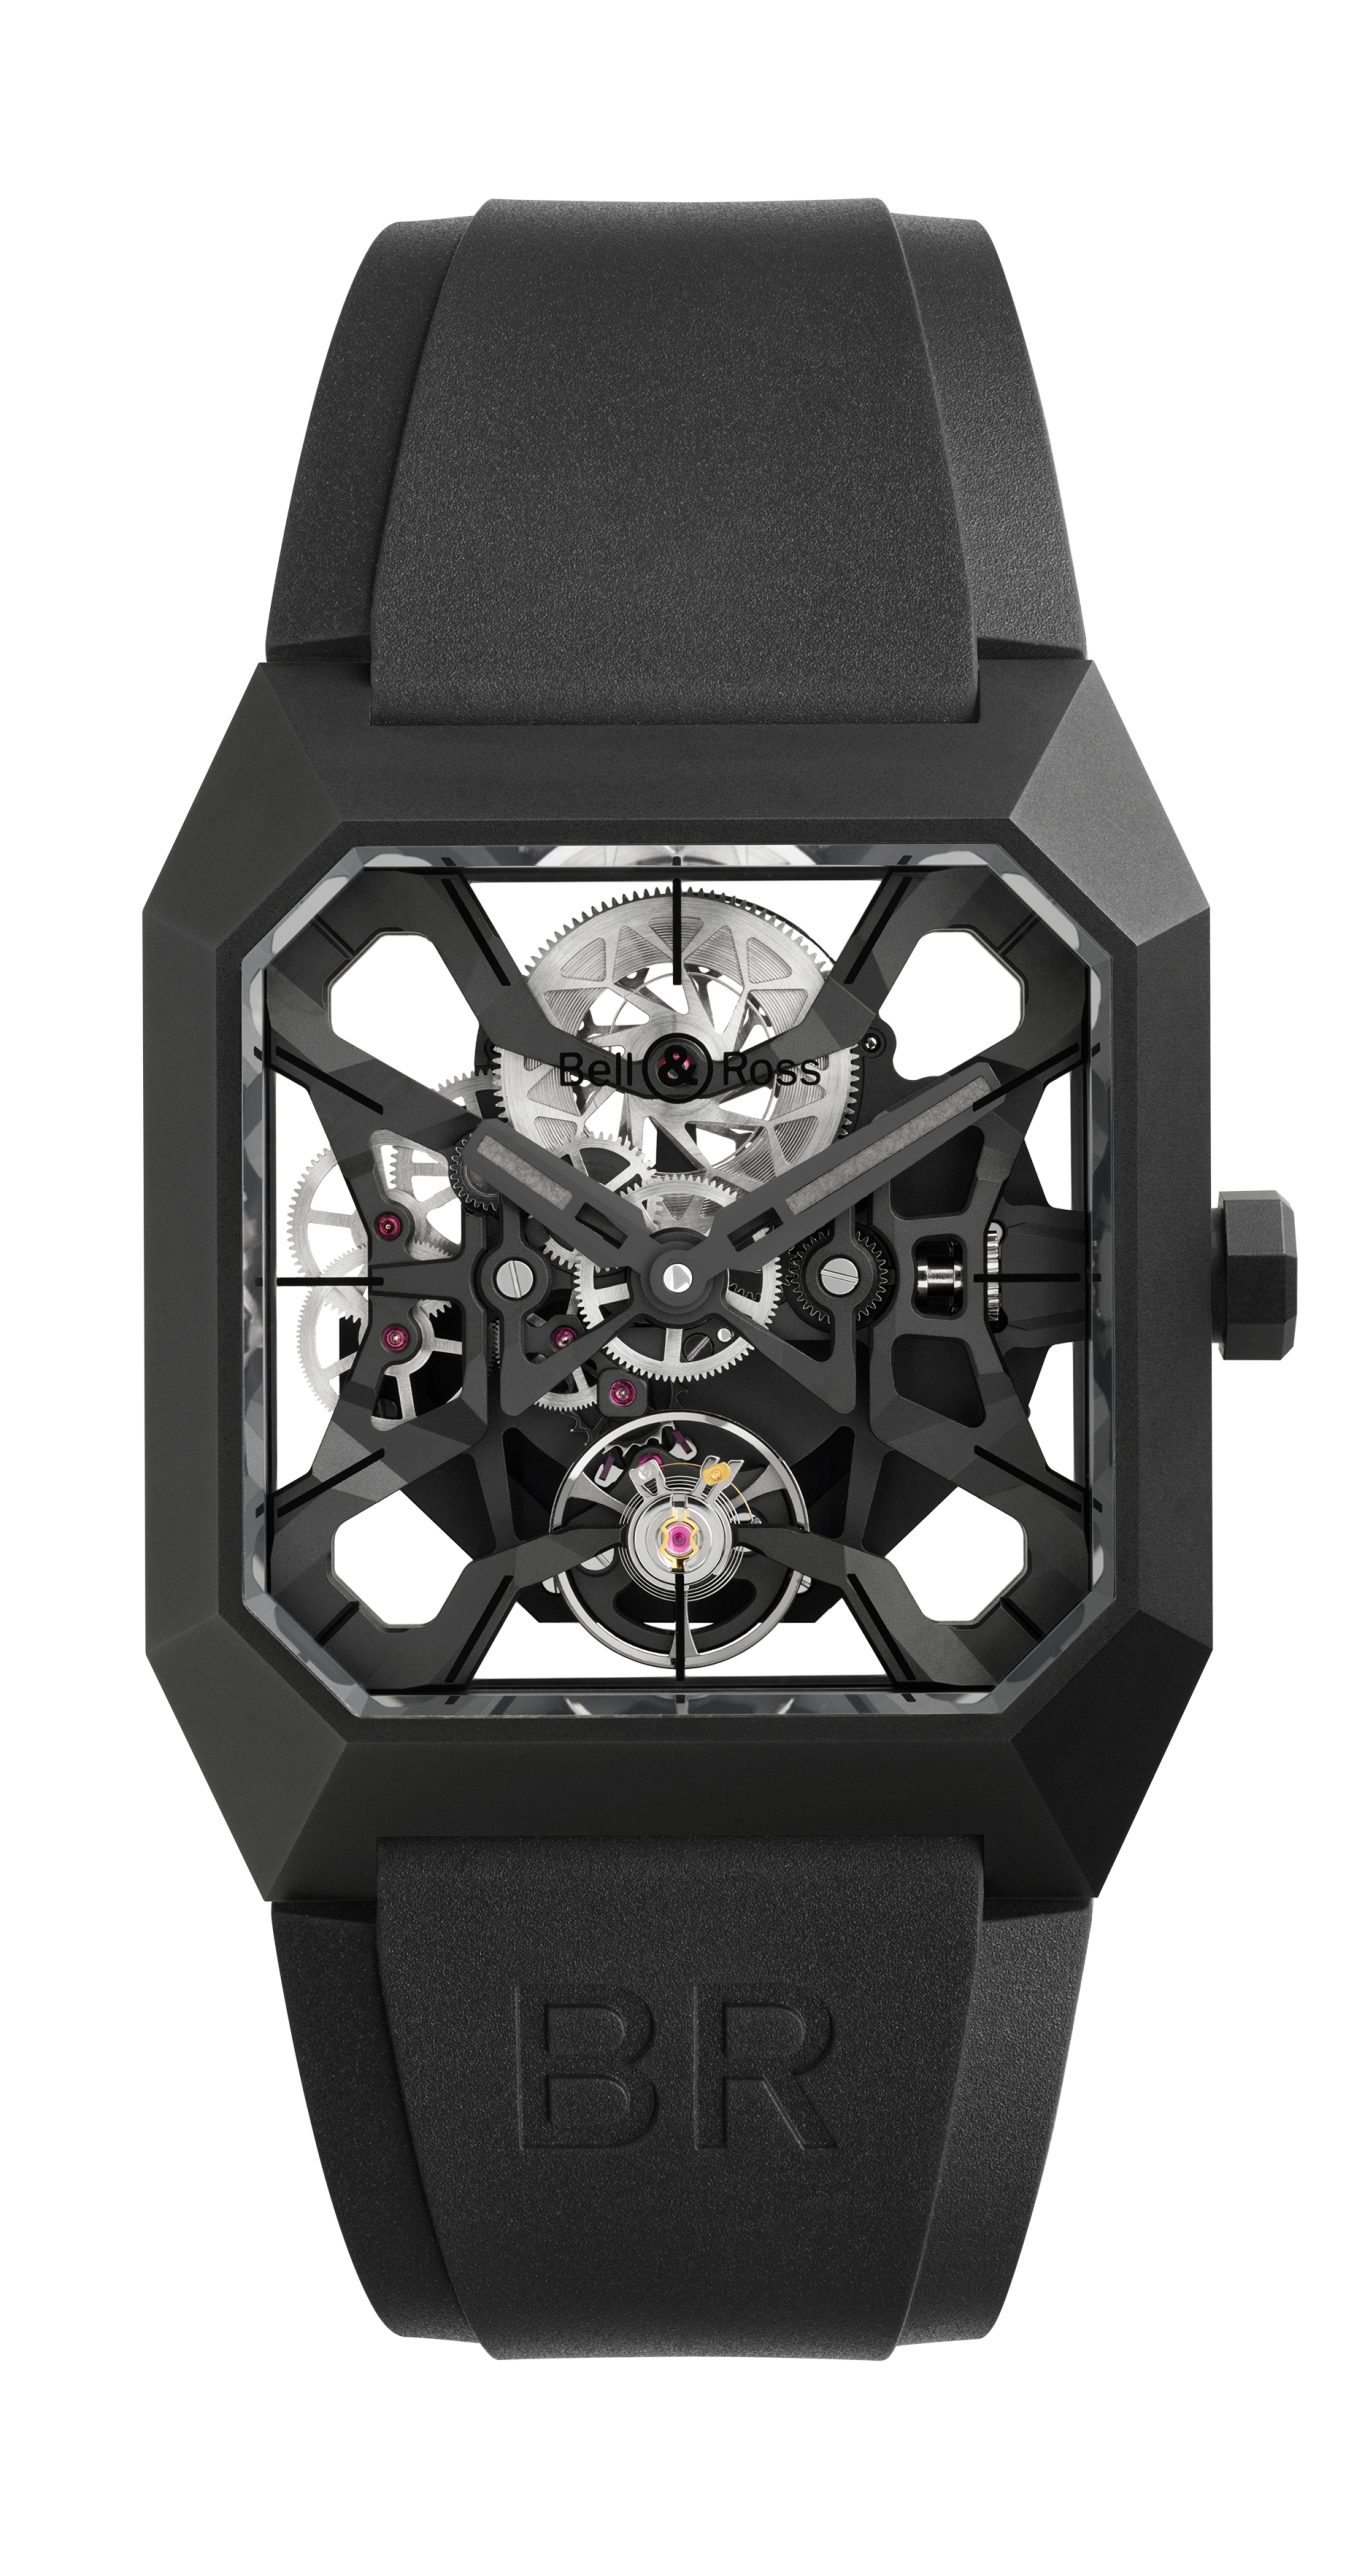 Bell & Ross Takes on Tomorrow With the Bell & Ross BR 03 Cyber Ceramic